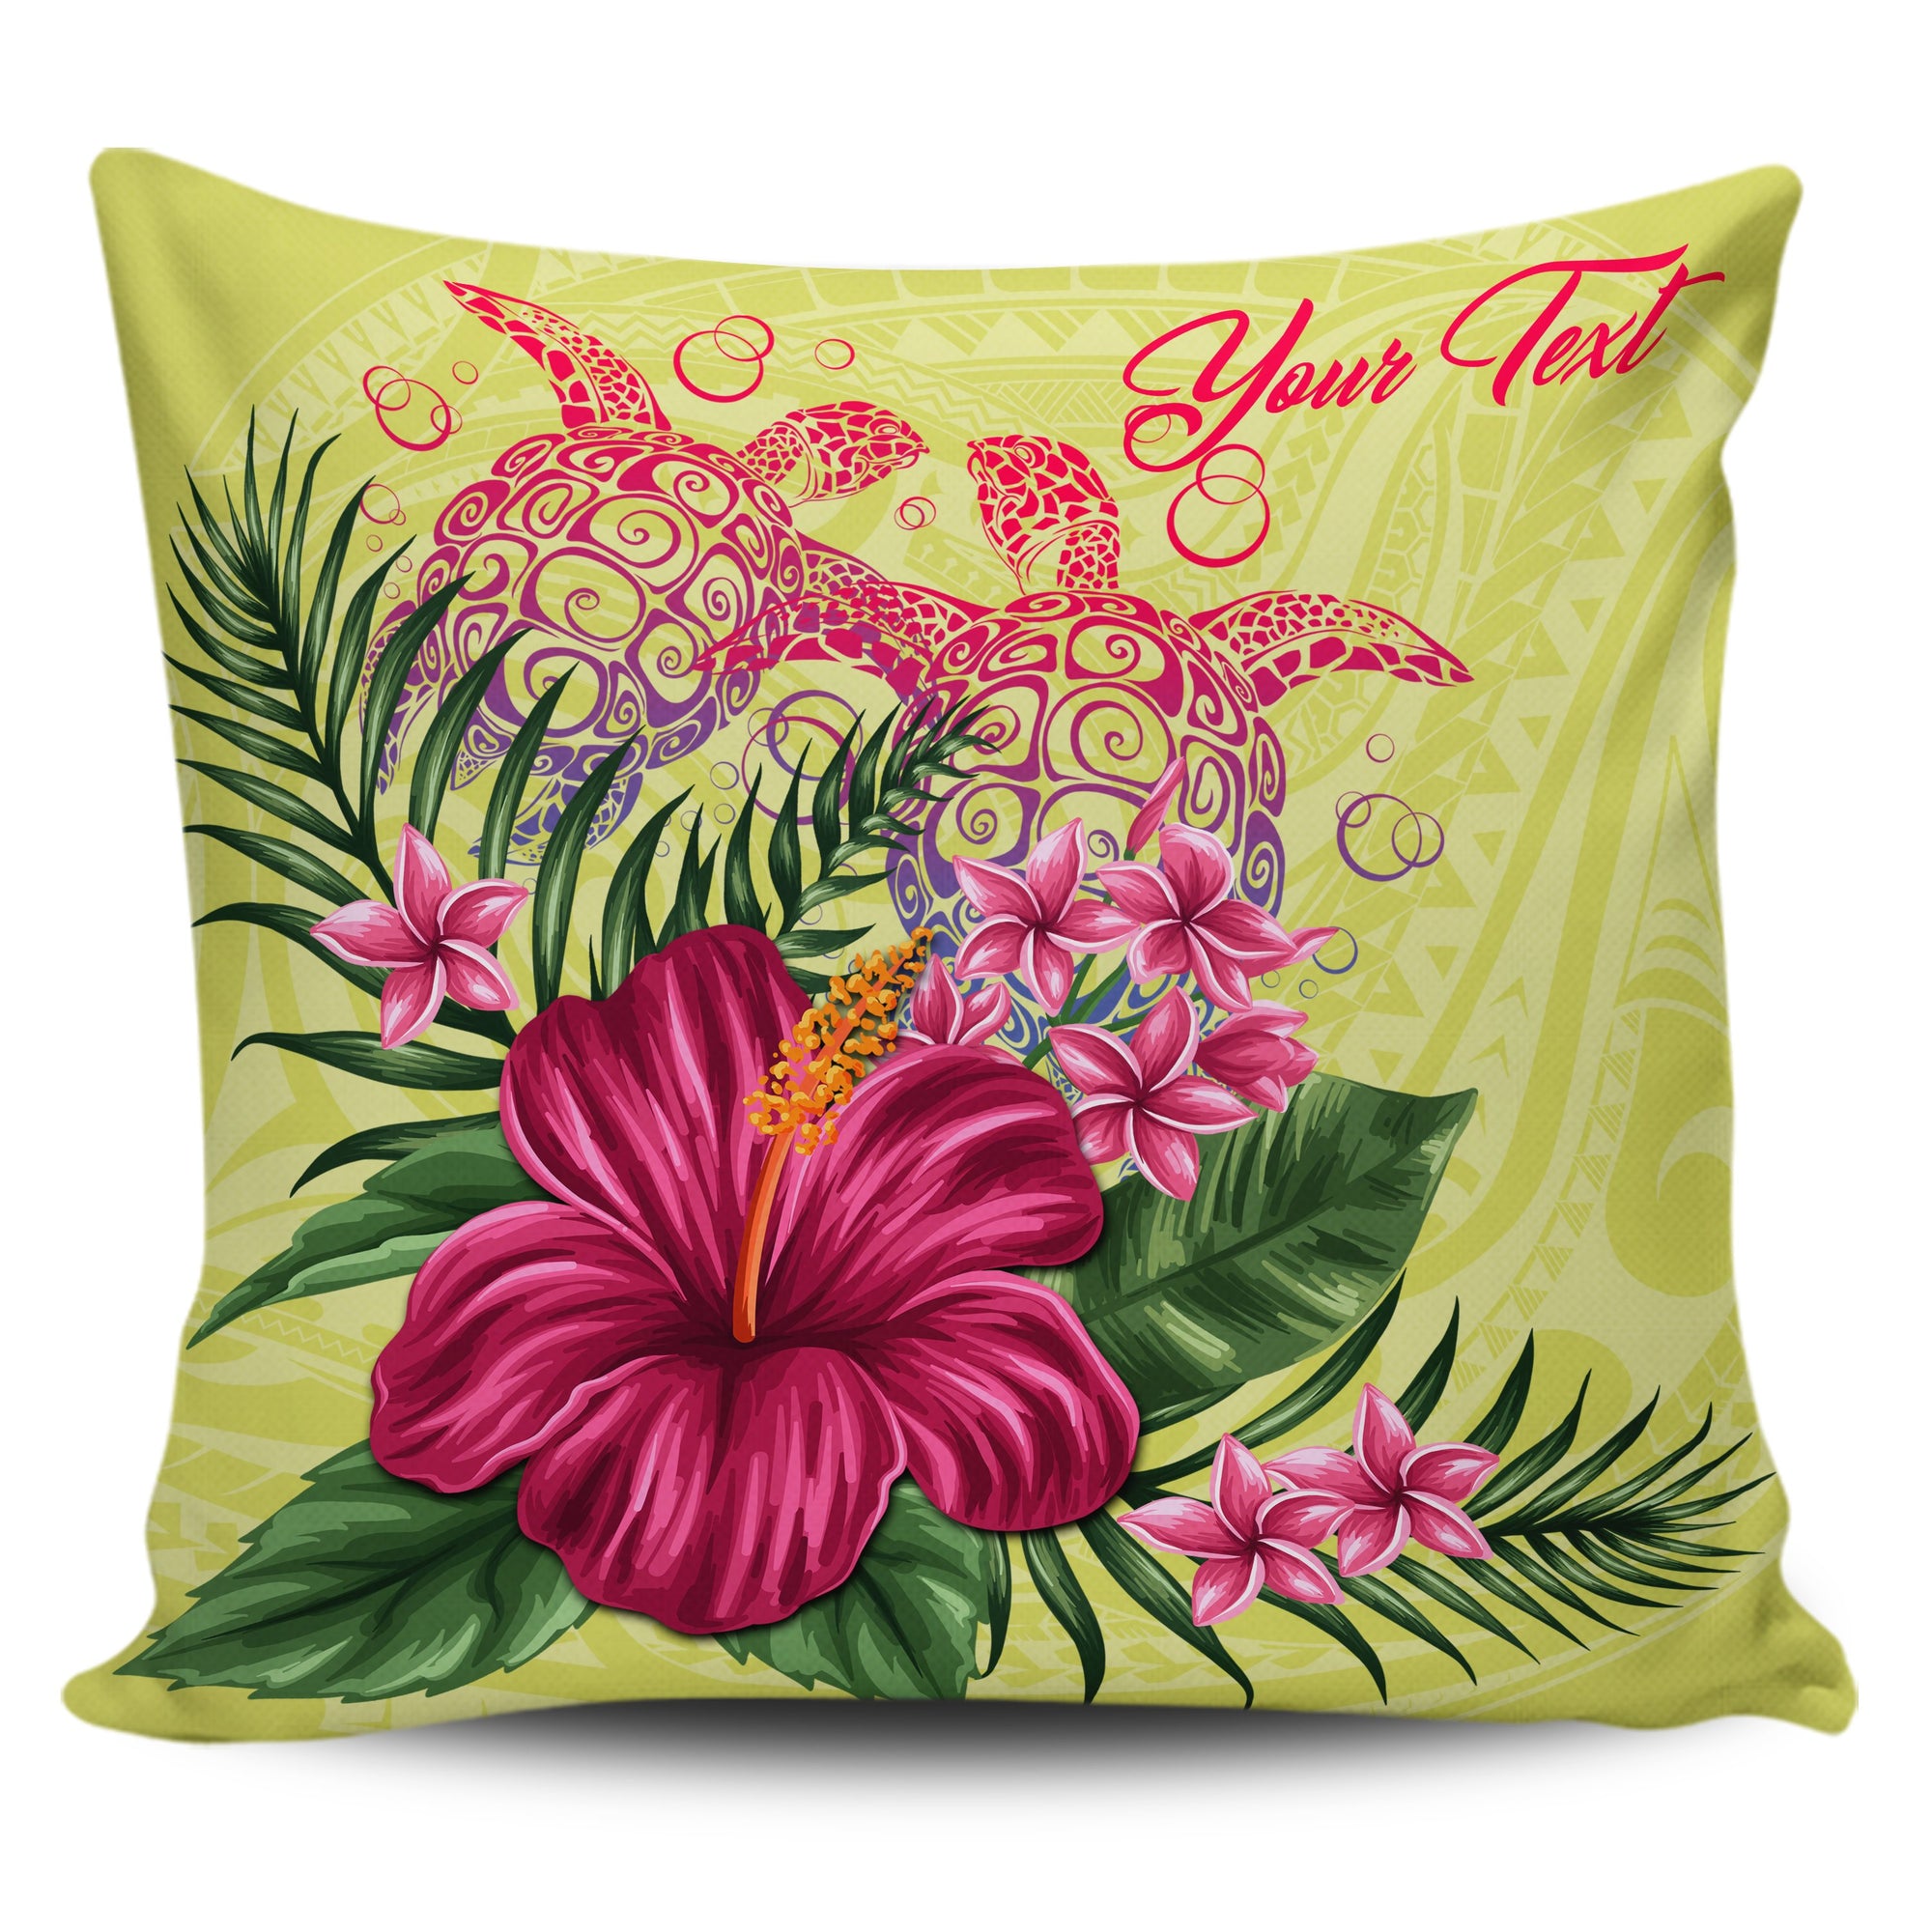 Personalized Hawaii Turtle Hibiscus Flower Polynesian Pillow Covers - Dulcie Style - AH One Size Yellow - Polynesian Pride